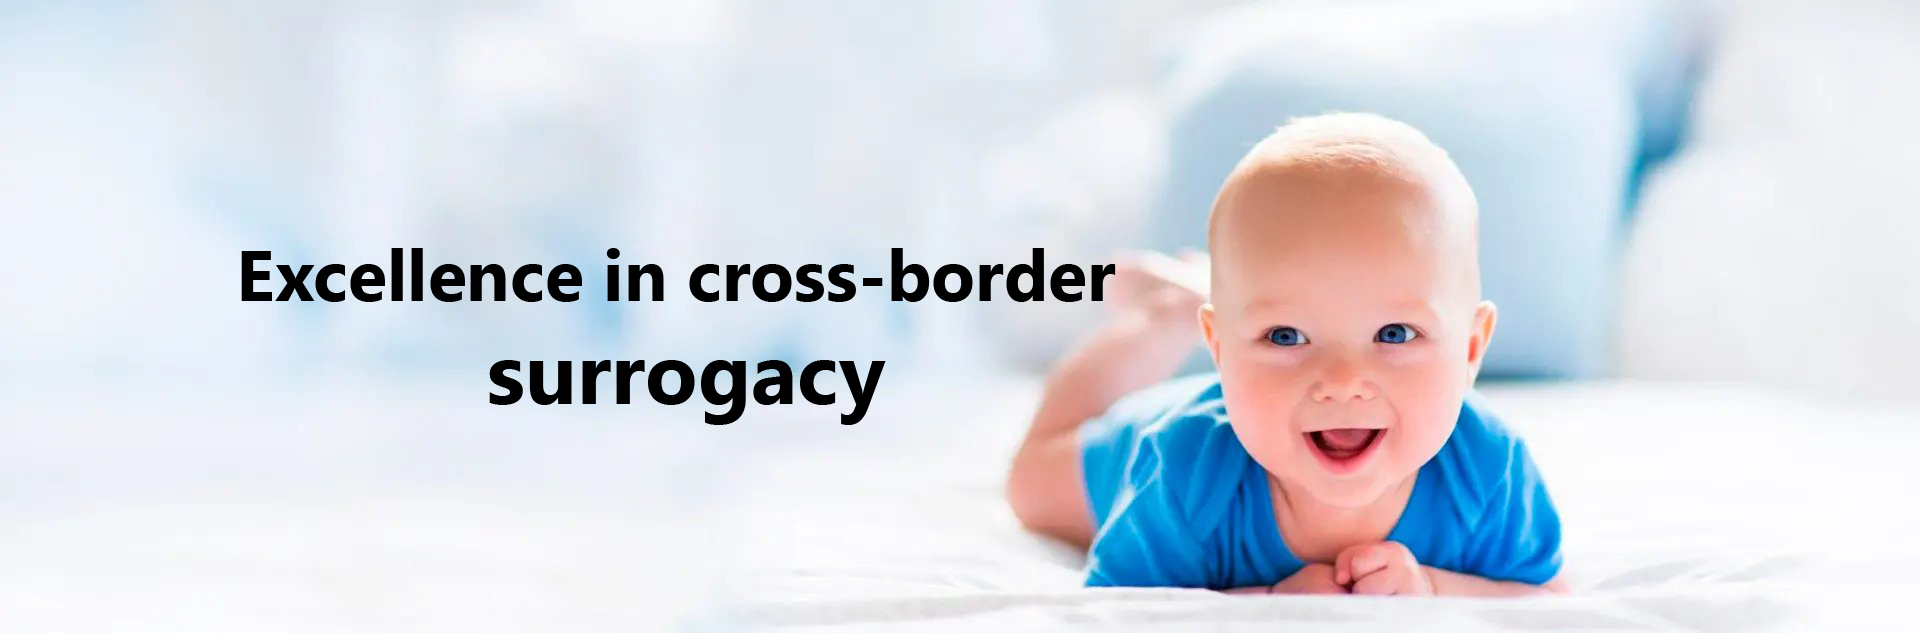 surrogacy in Thailand for foreigners